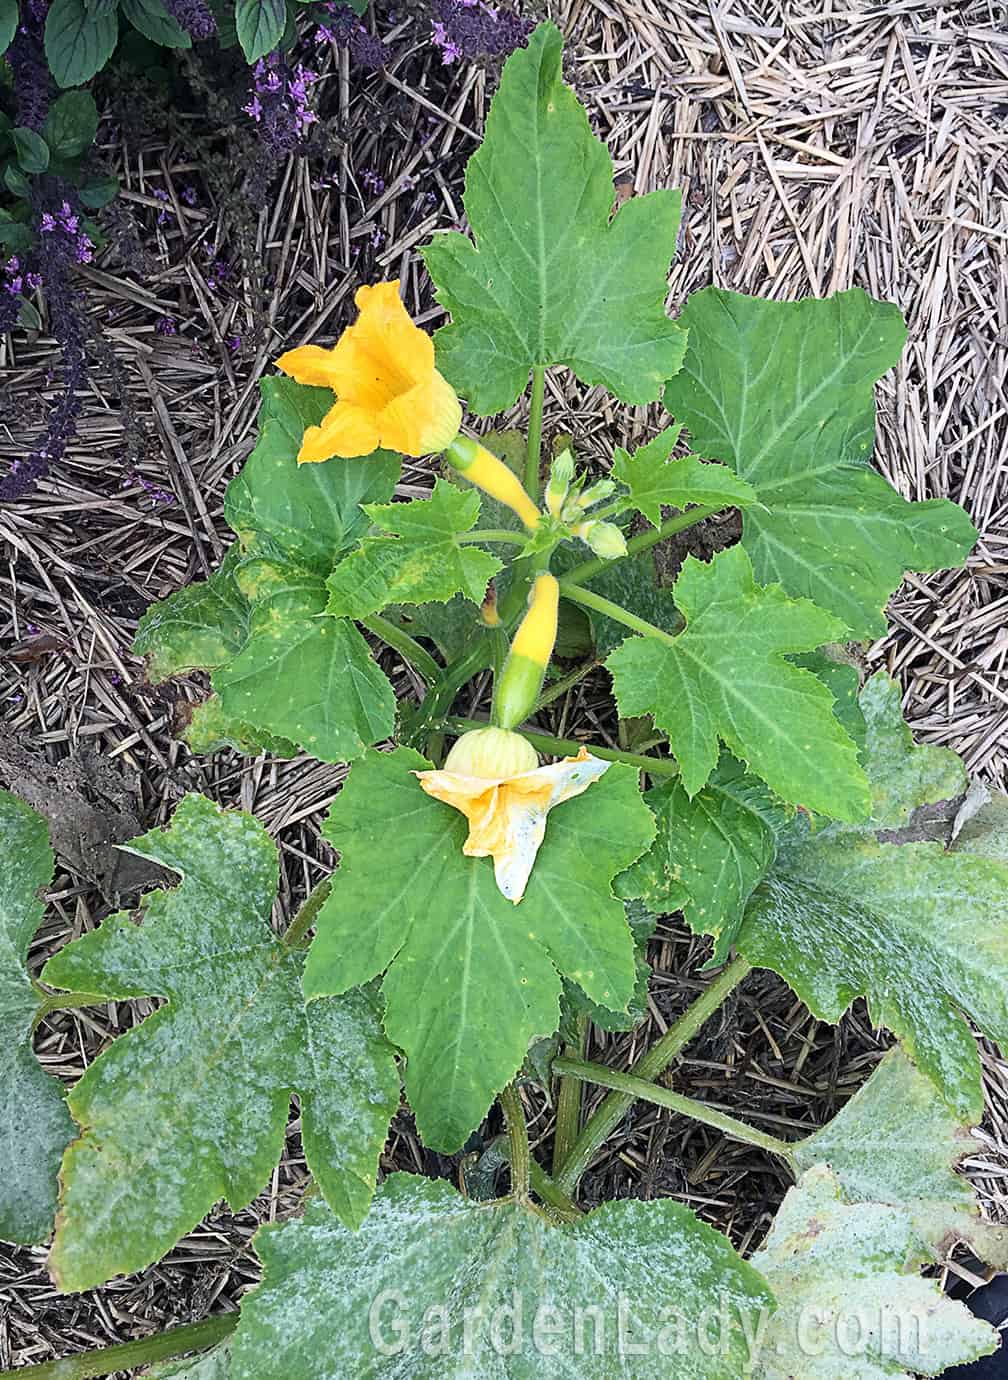 This photo, taken October 6, clearly shows that the old foliage has powdery mildew but the plant keeps producing new, fresh and clean leaves, flowers and squash.